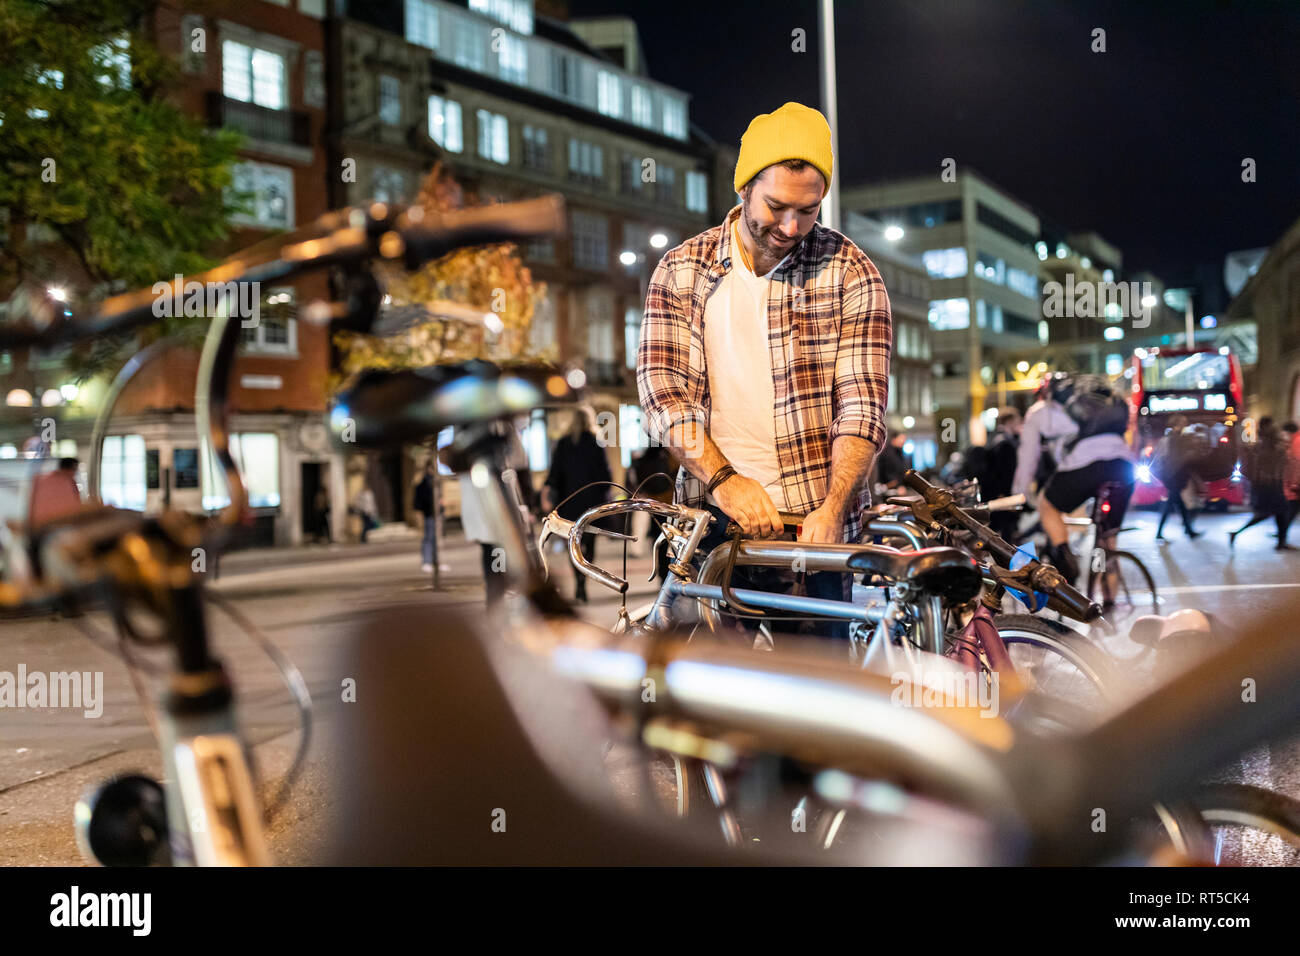 UK, London, man unlocking his bike and commuting at night in the city Stock Photo